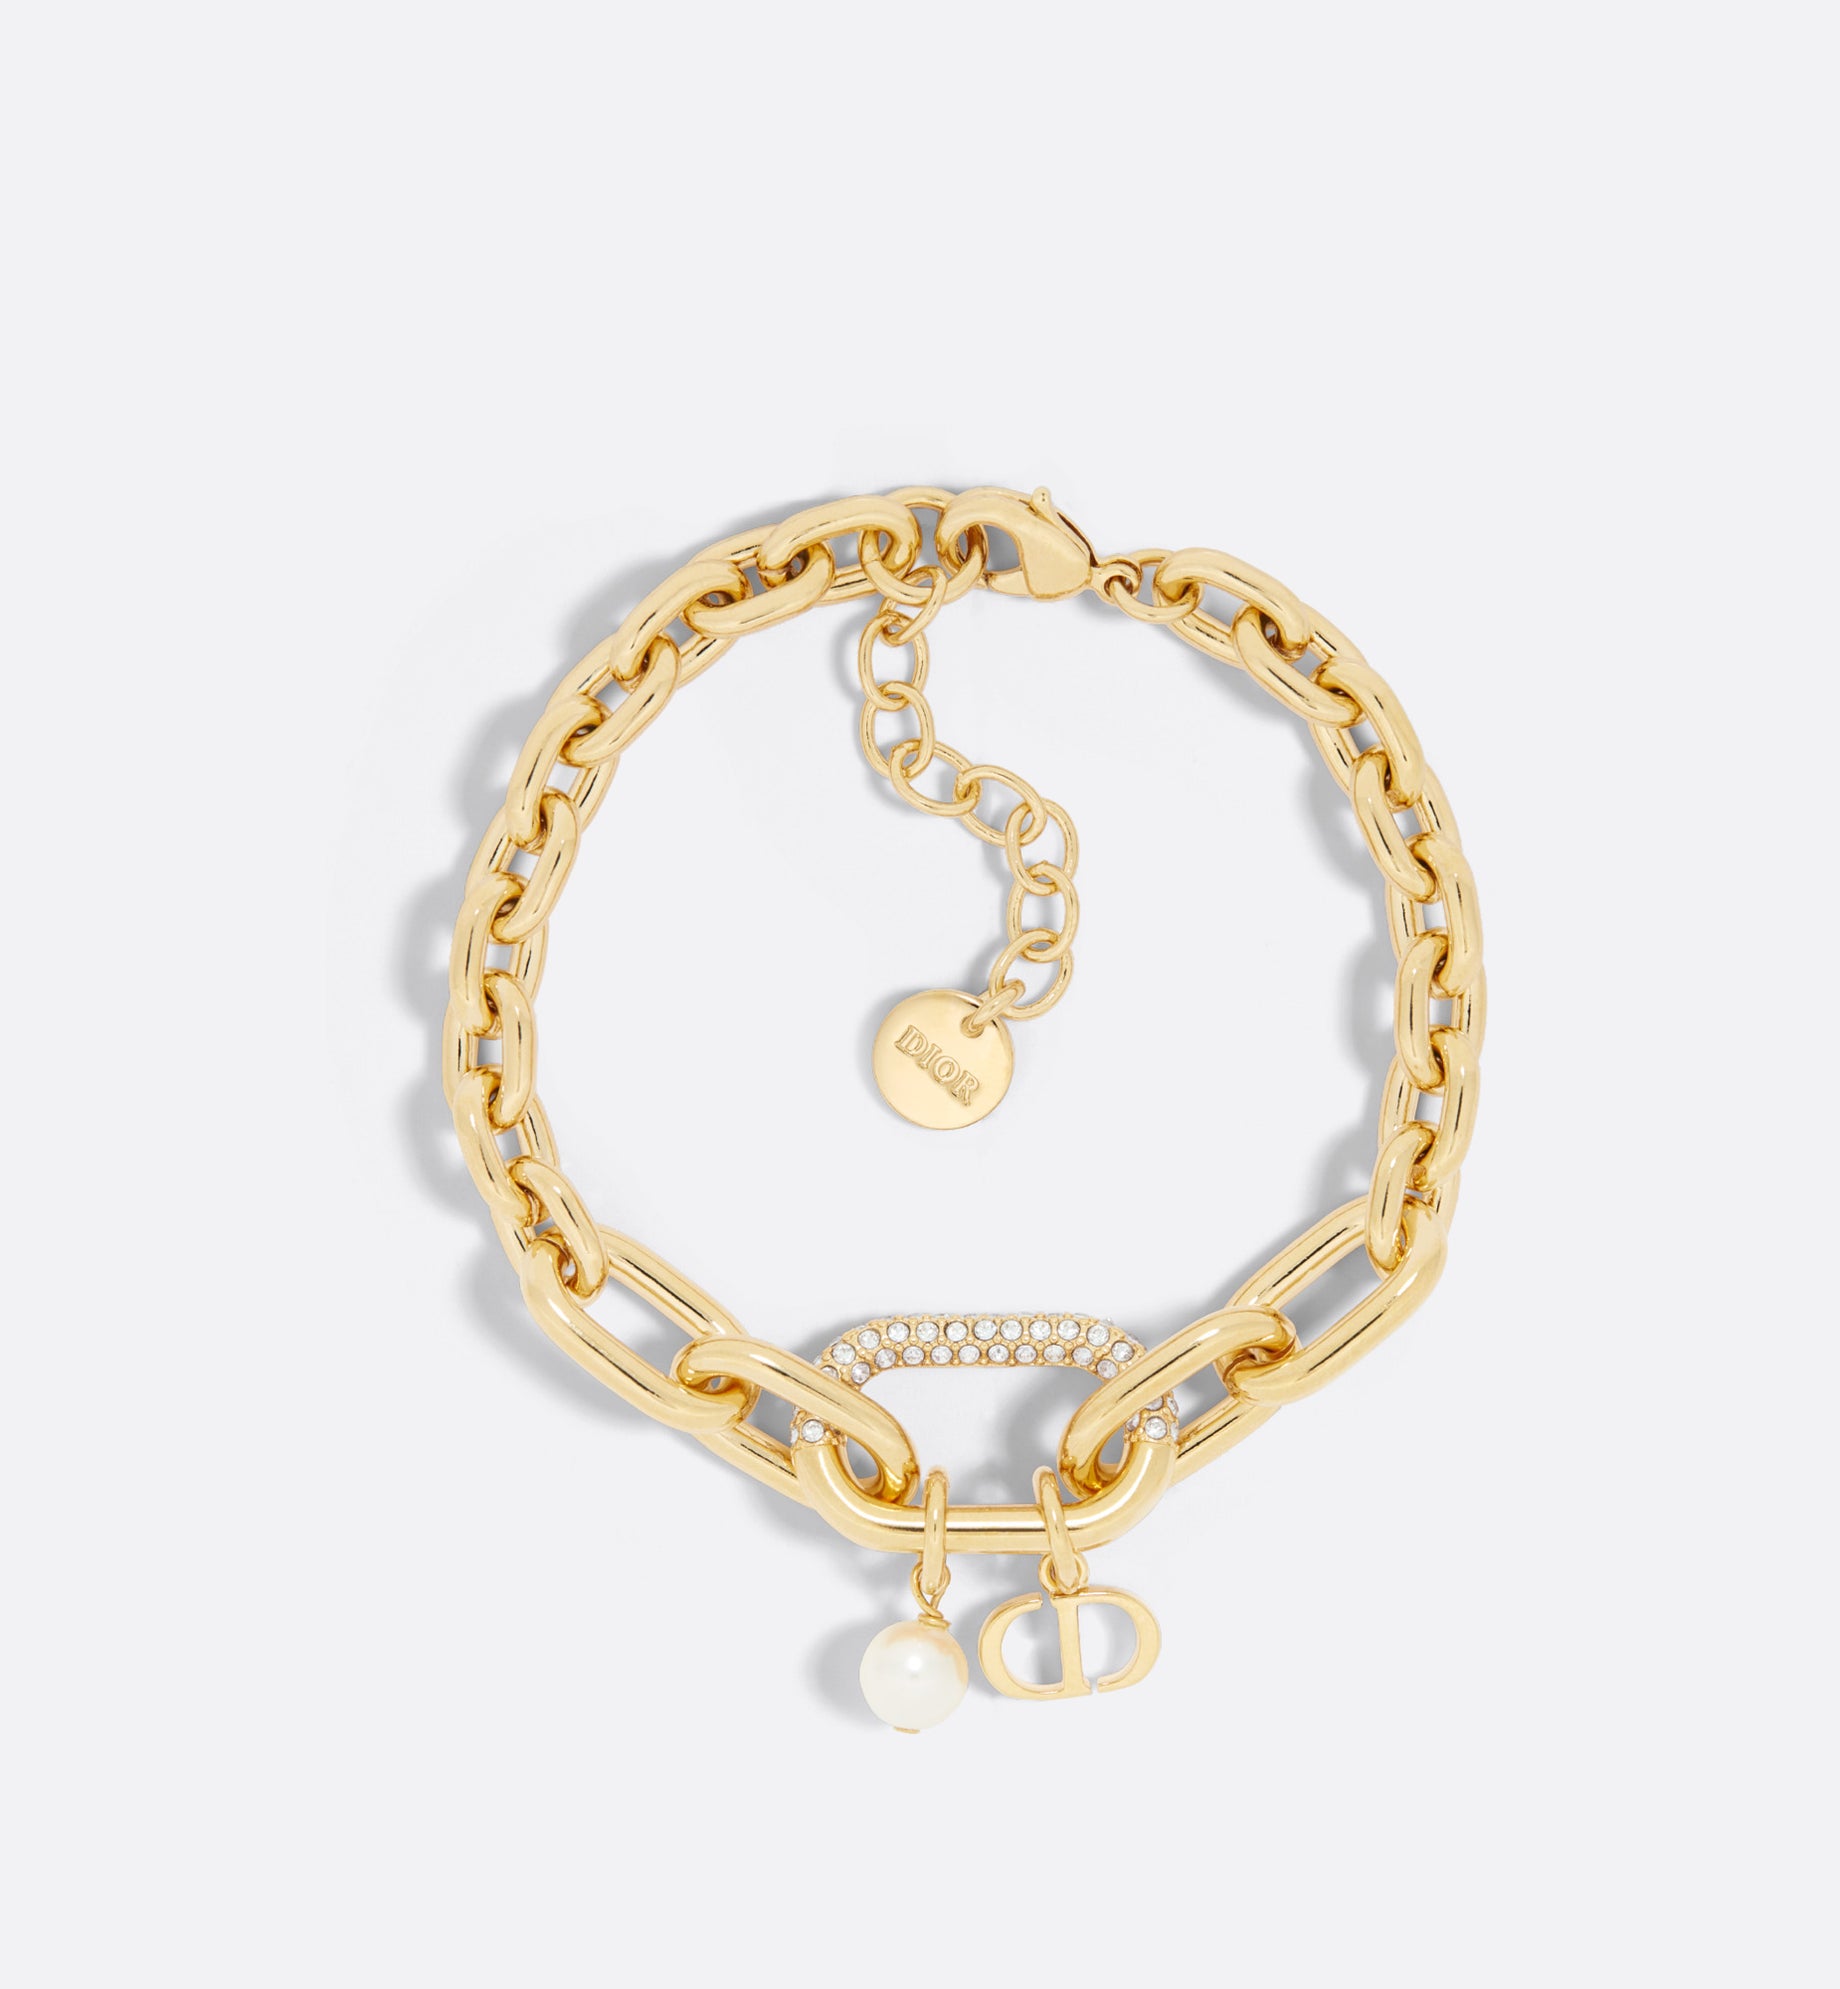 D-Fusion Bracelet • Gold-Finish Metal with a White Resin Pearl and Silver-Tone Crystals